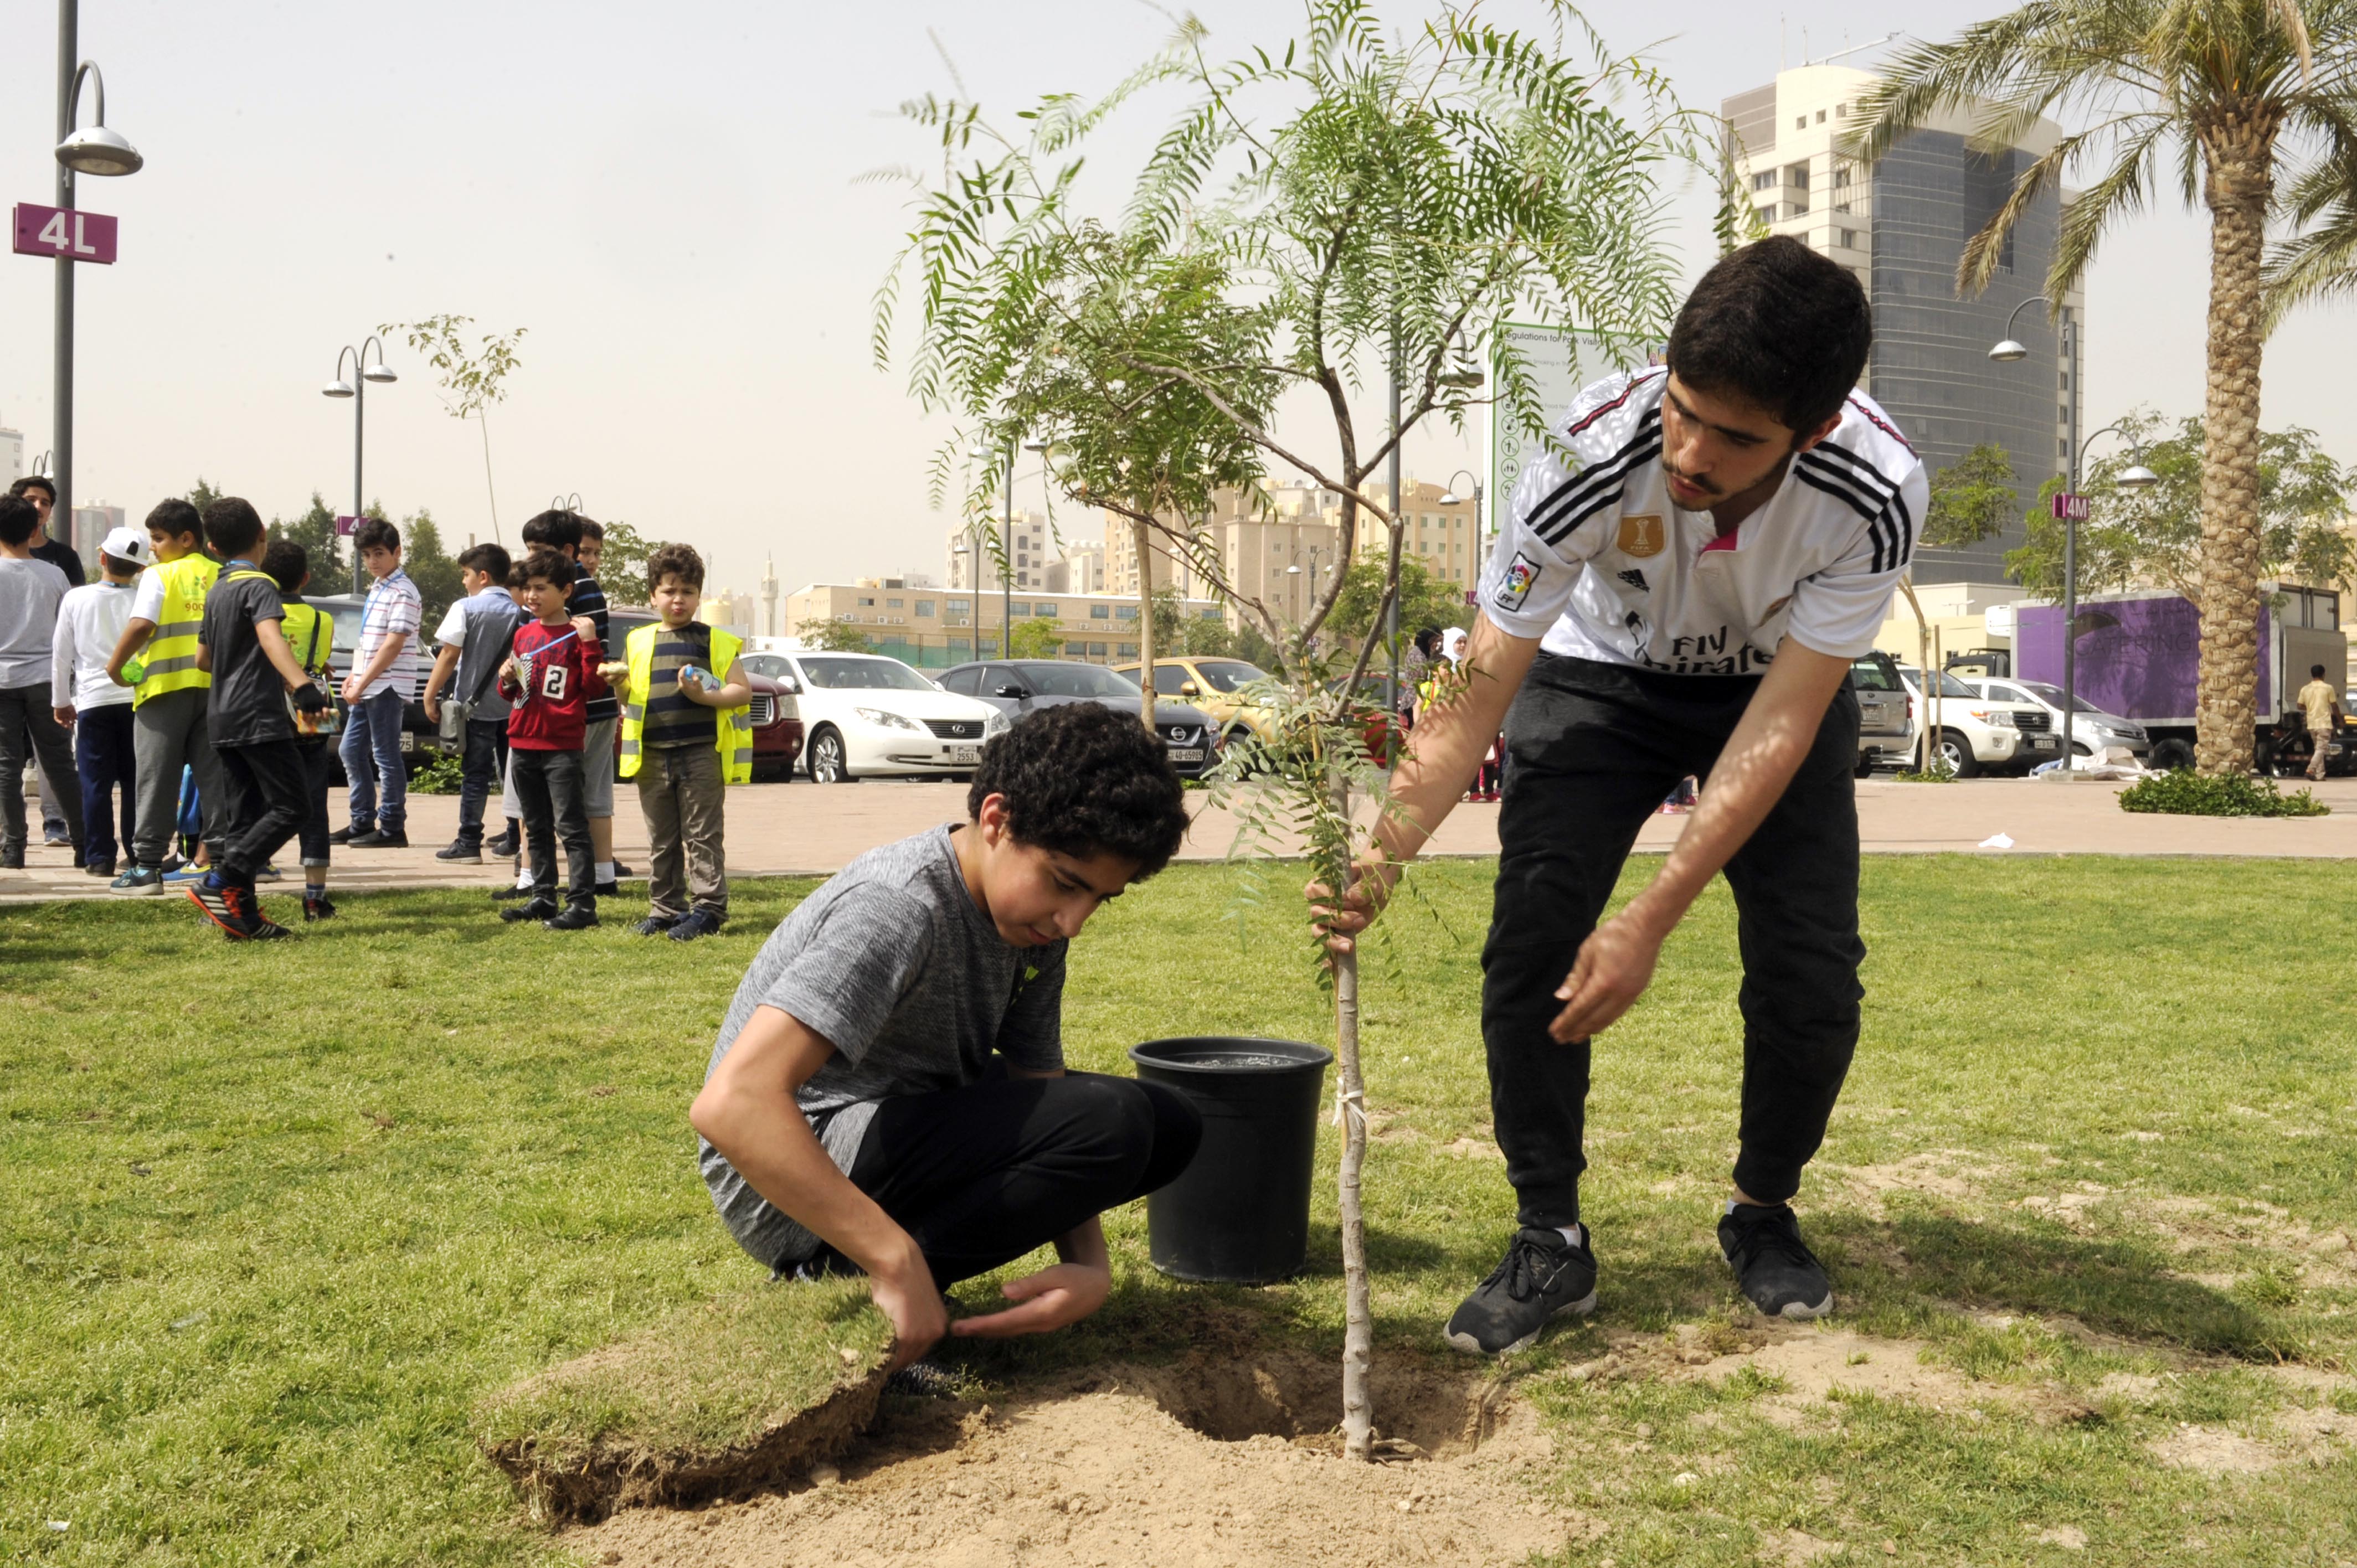 One of the programs to teach youngsters to plant